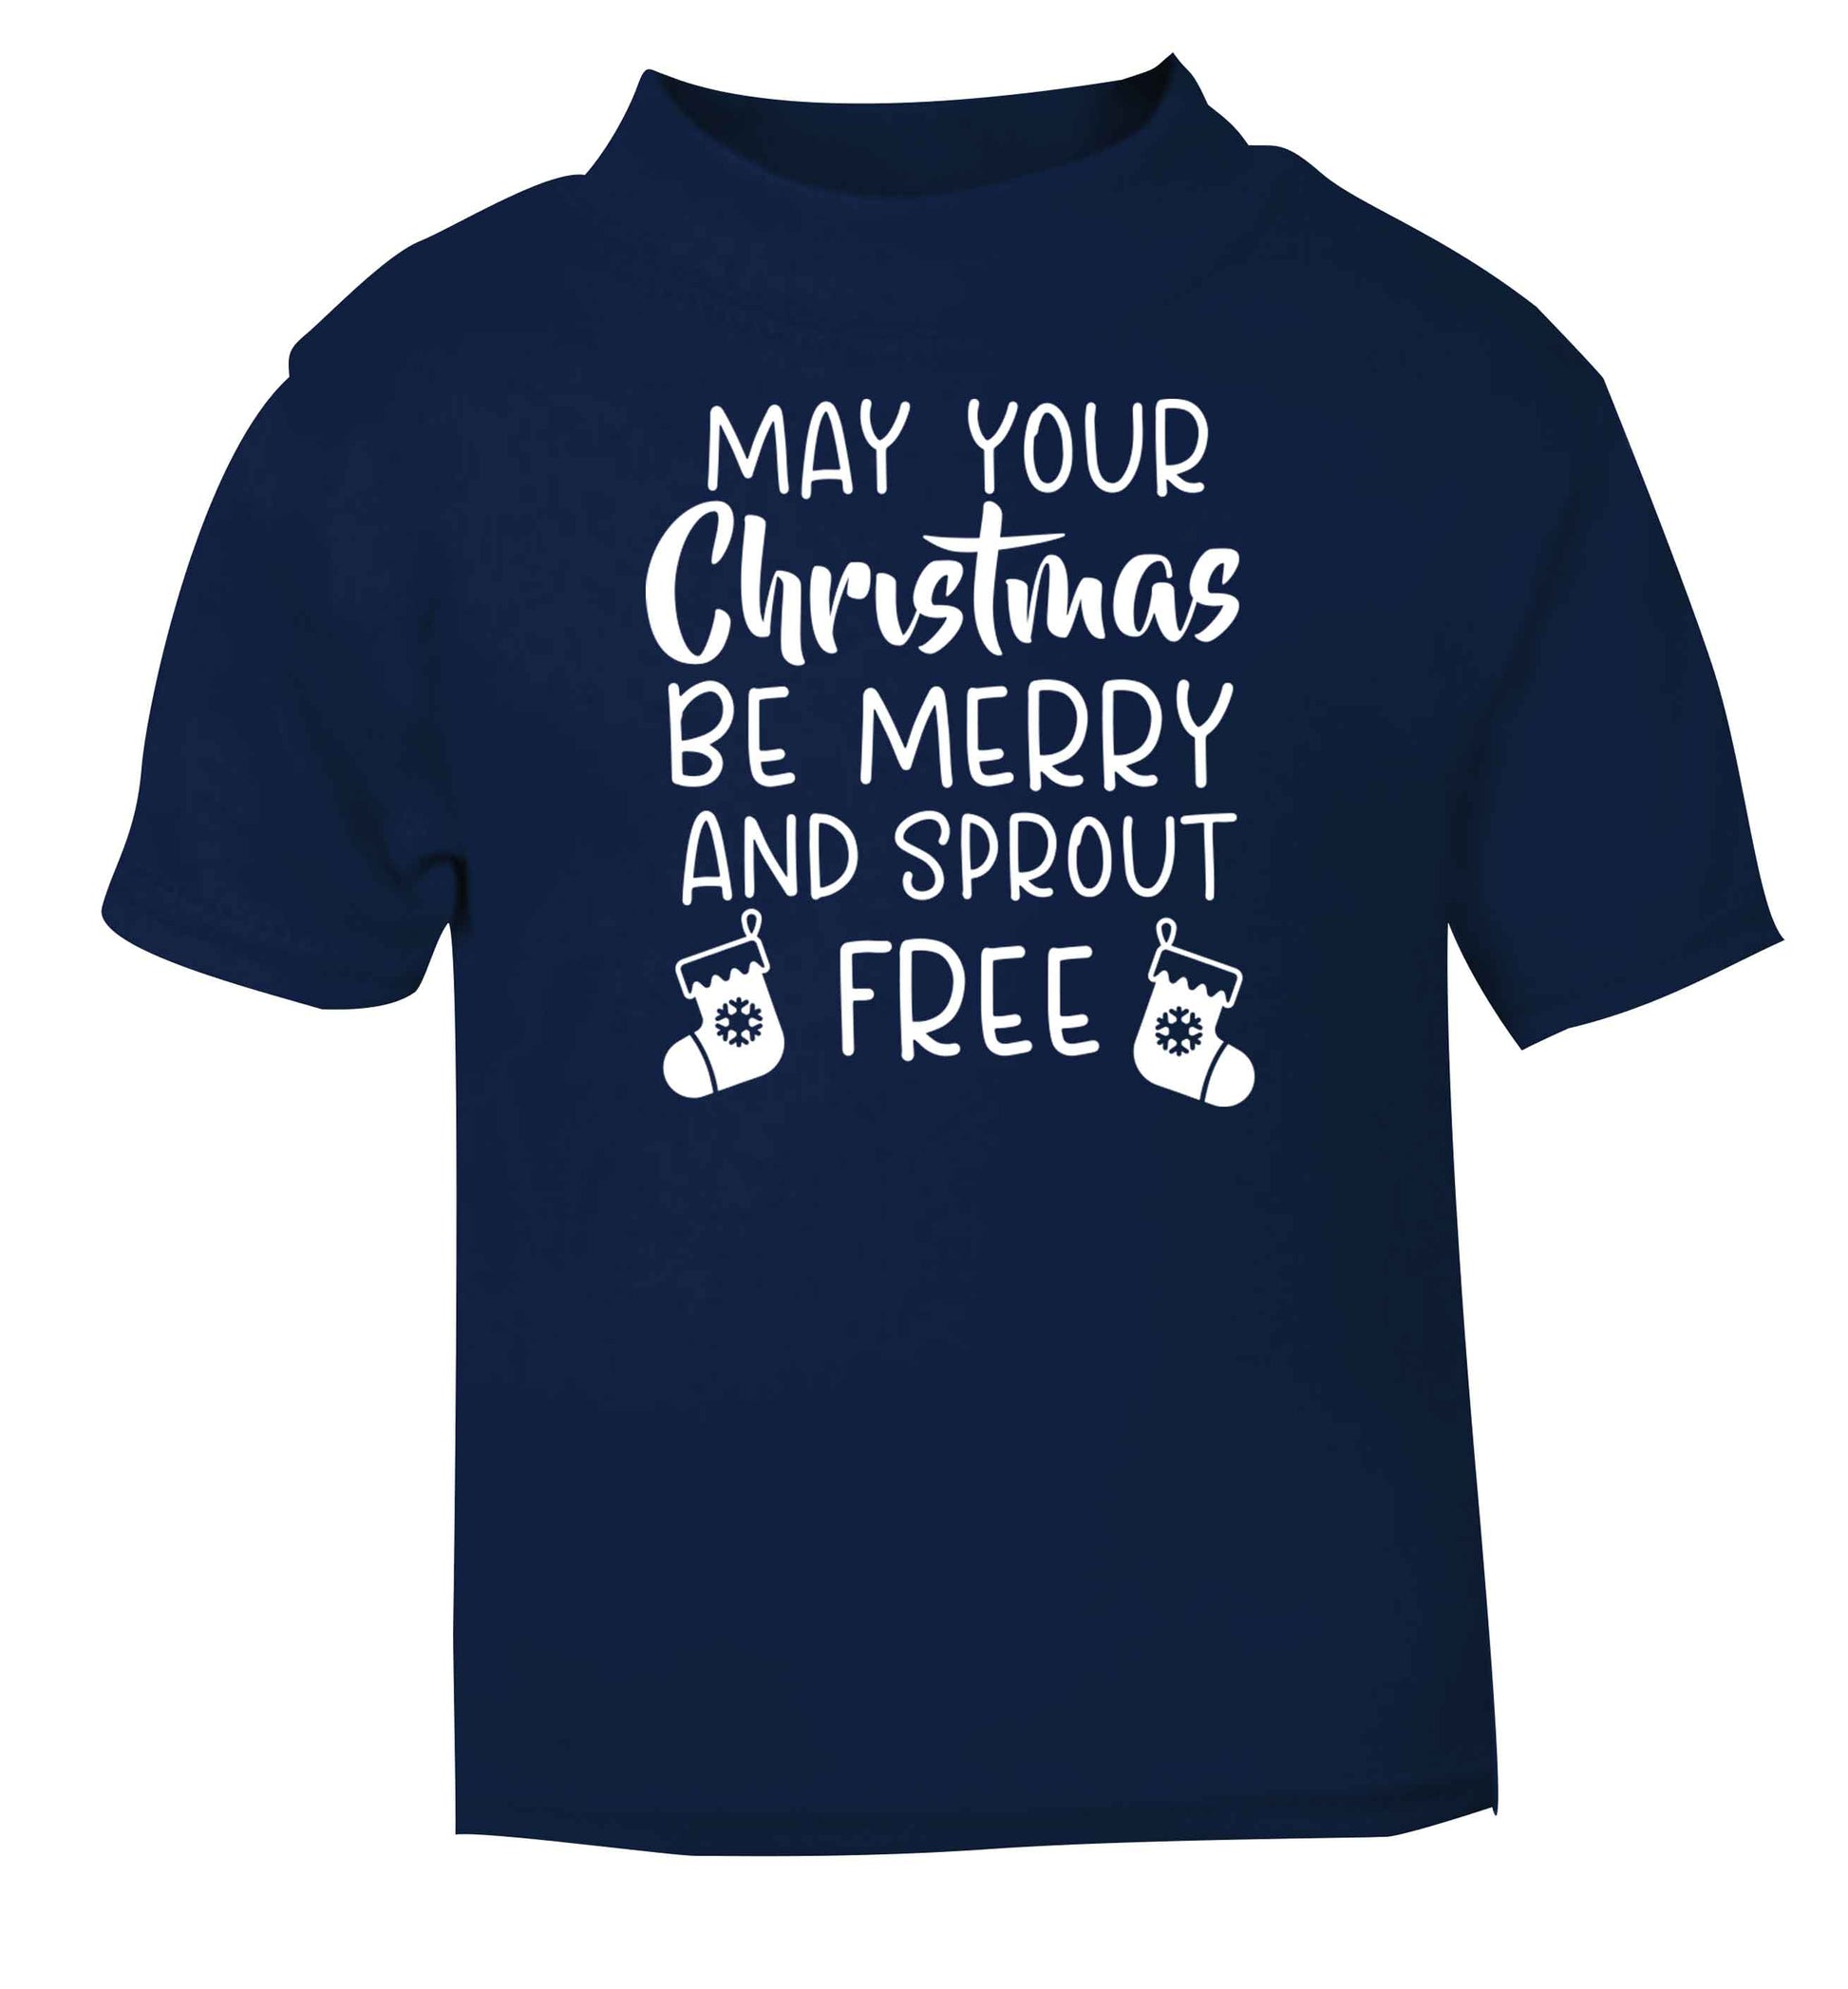 May your Christmas be merry and sprout free navy baby toddler Tshirt 2 Years